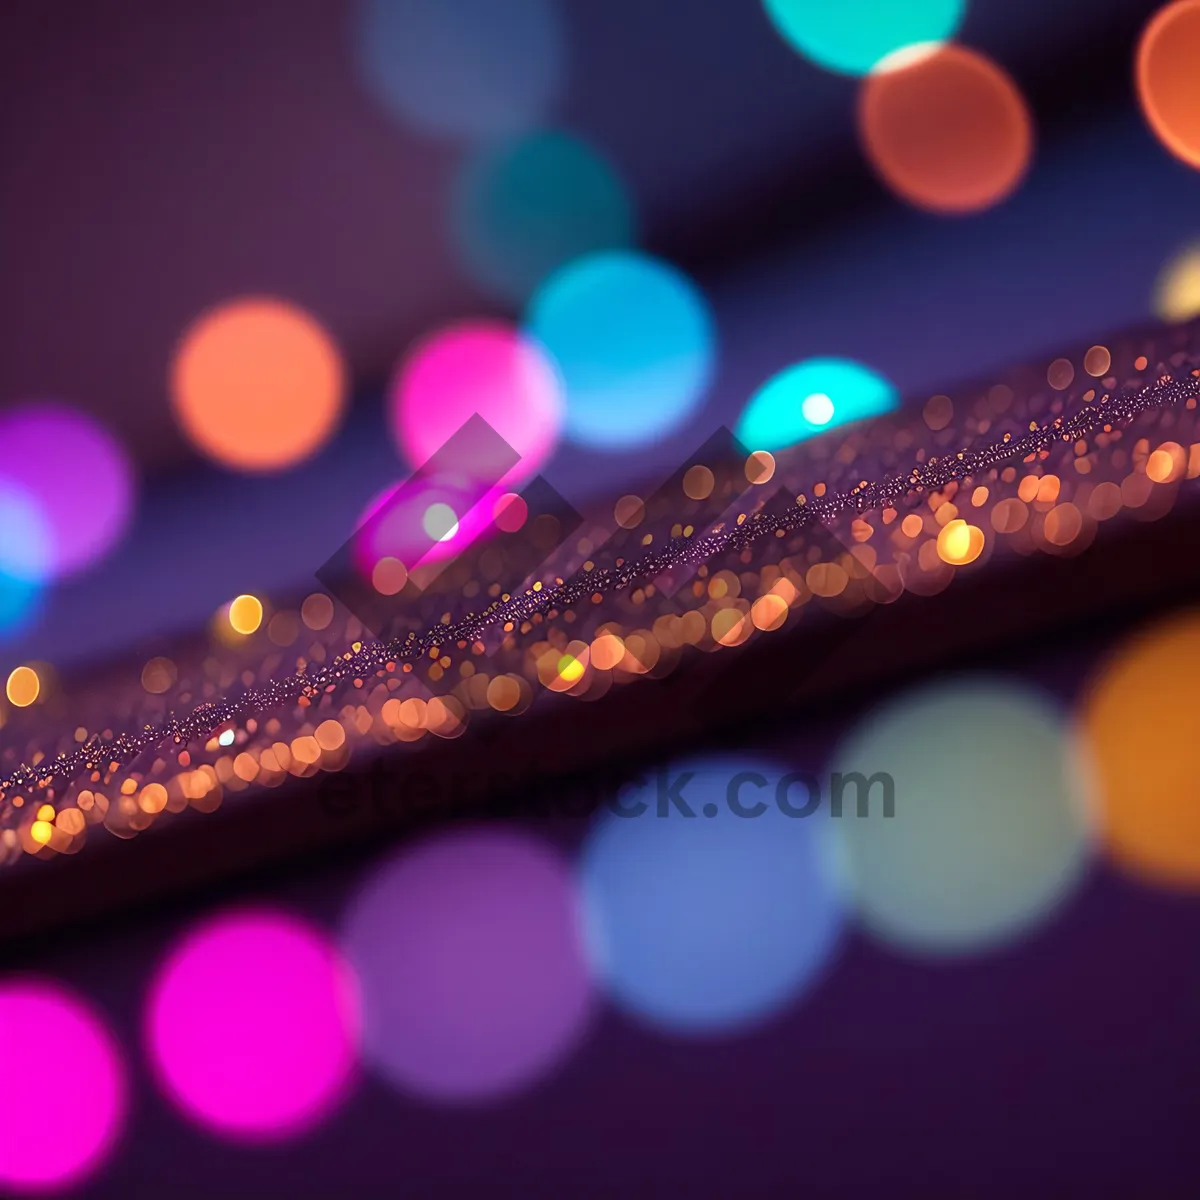 Picture of Glowing LED Light Decoration - Bright and Colorful Design